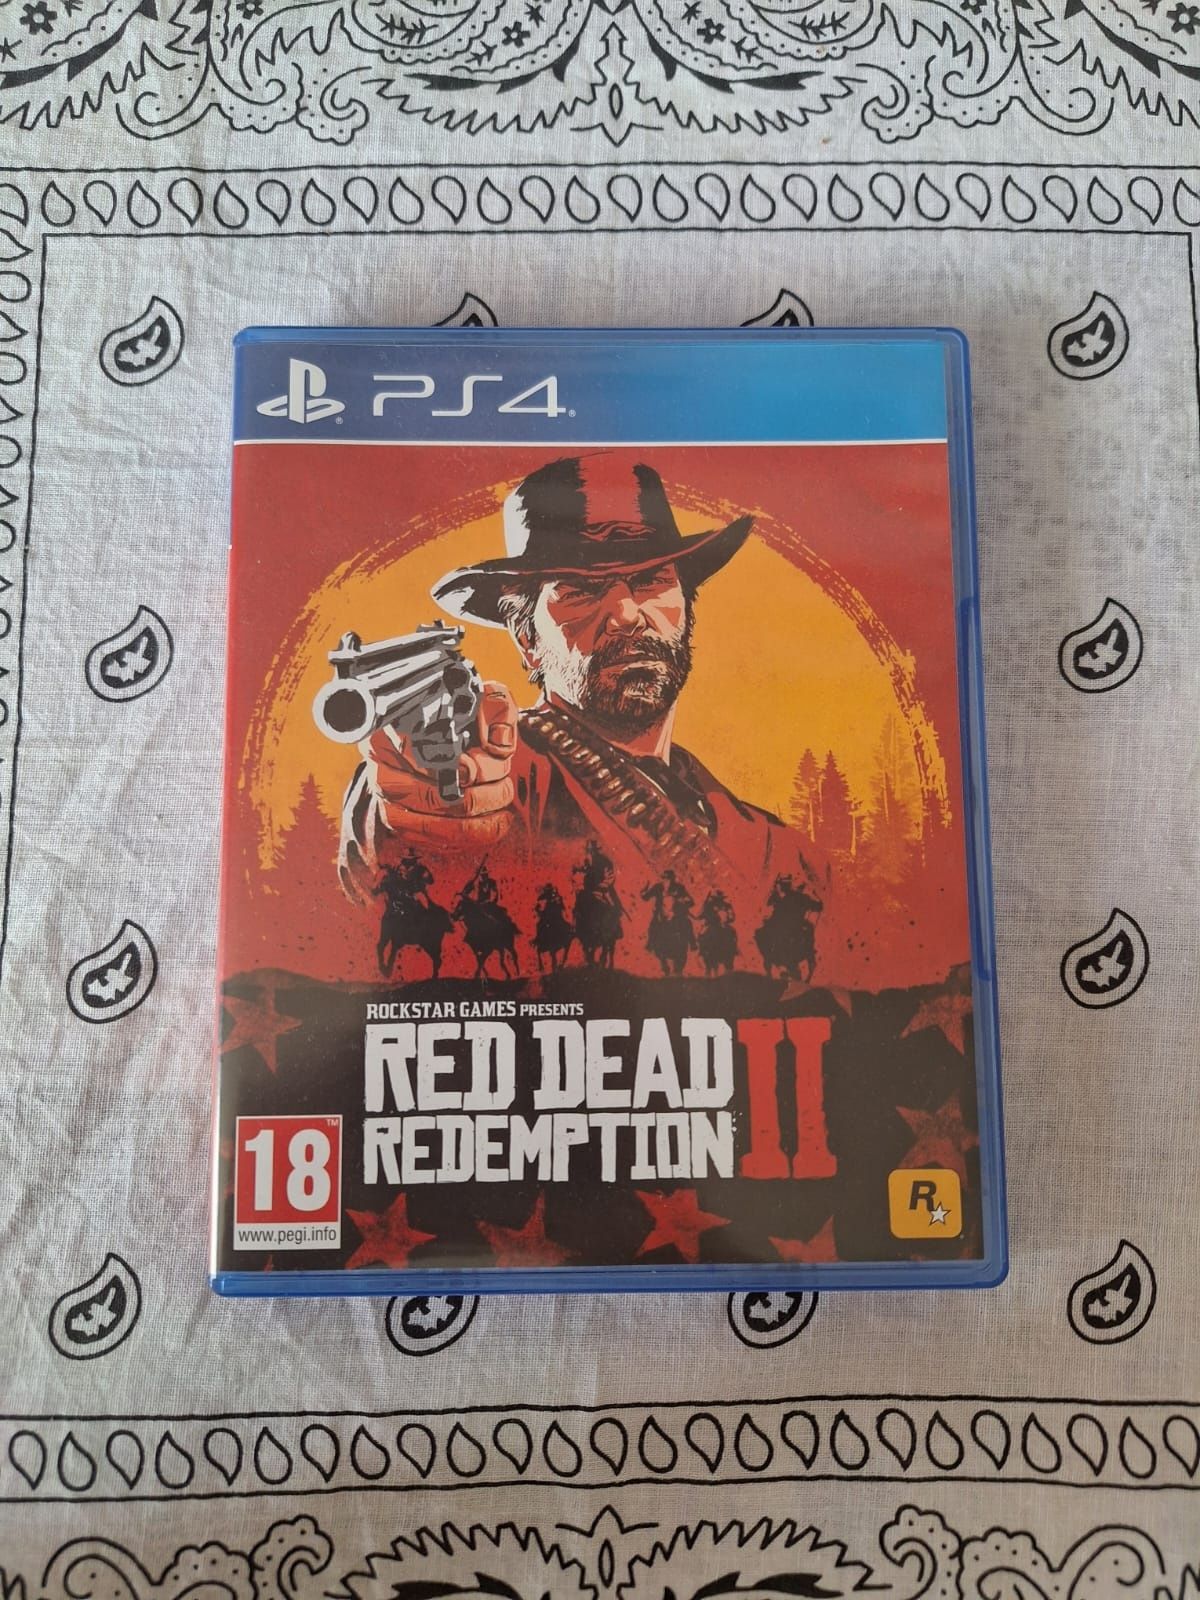 Read Dead Redemption 2 PS4